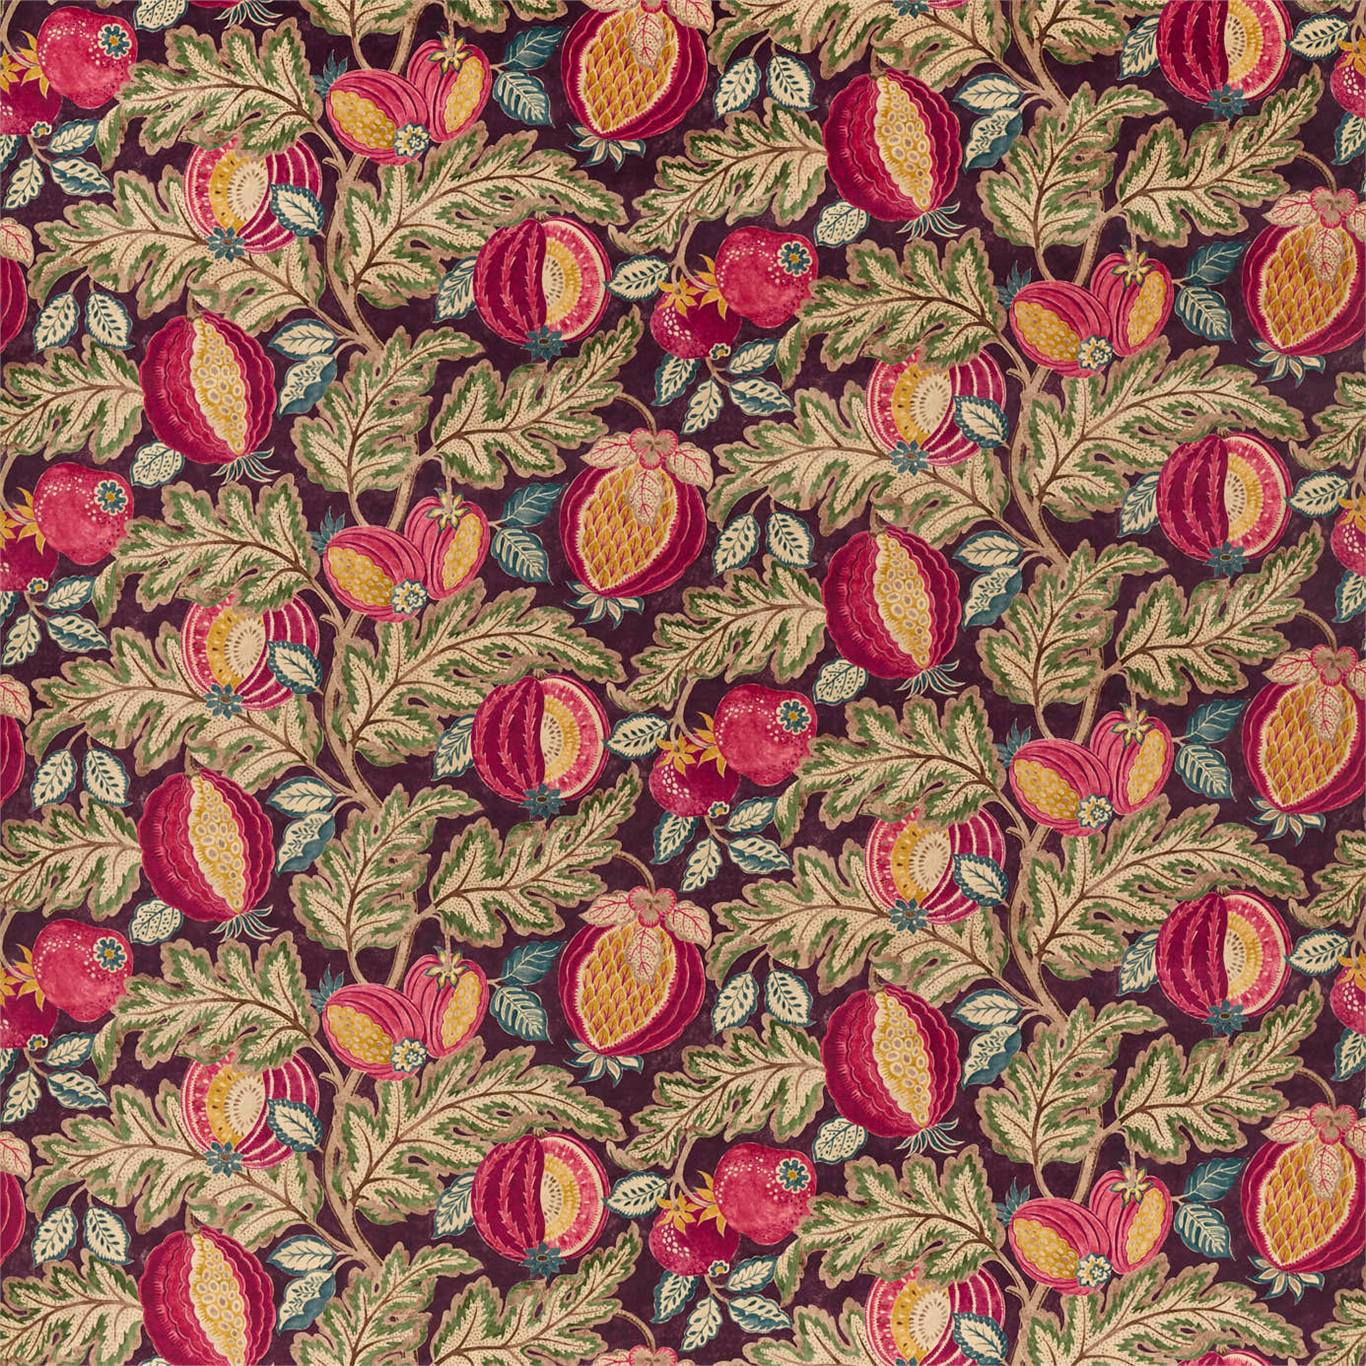 Cantaloupe Fabric by Sanderson - DCEF226635 - Cherry/Alabaster